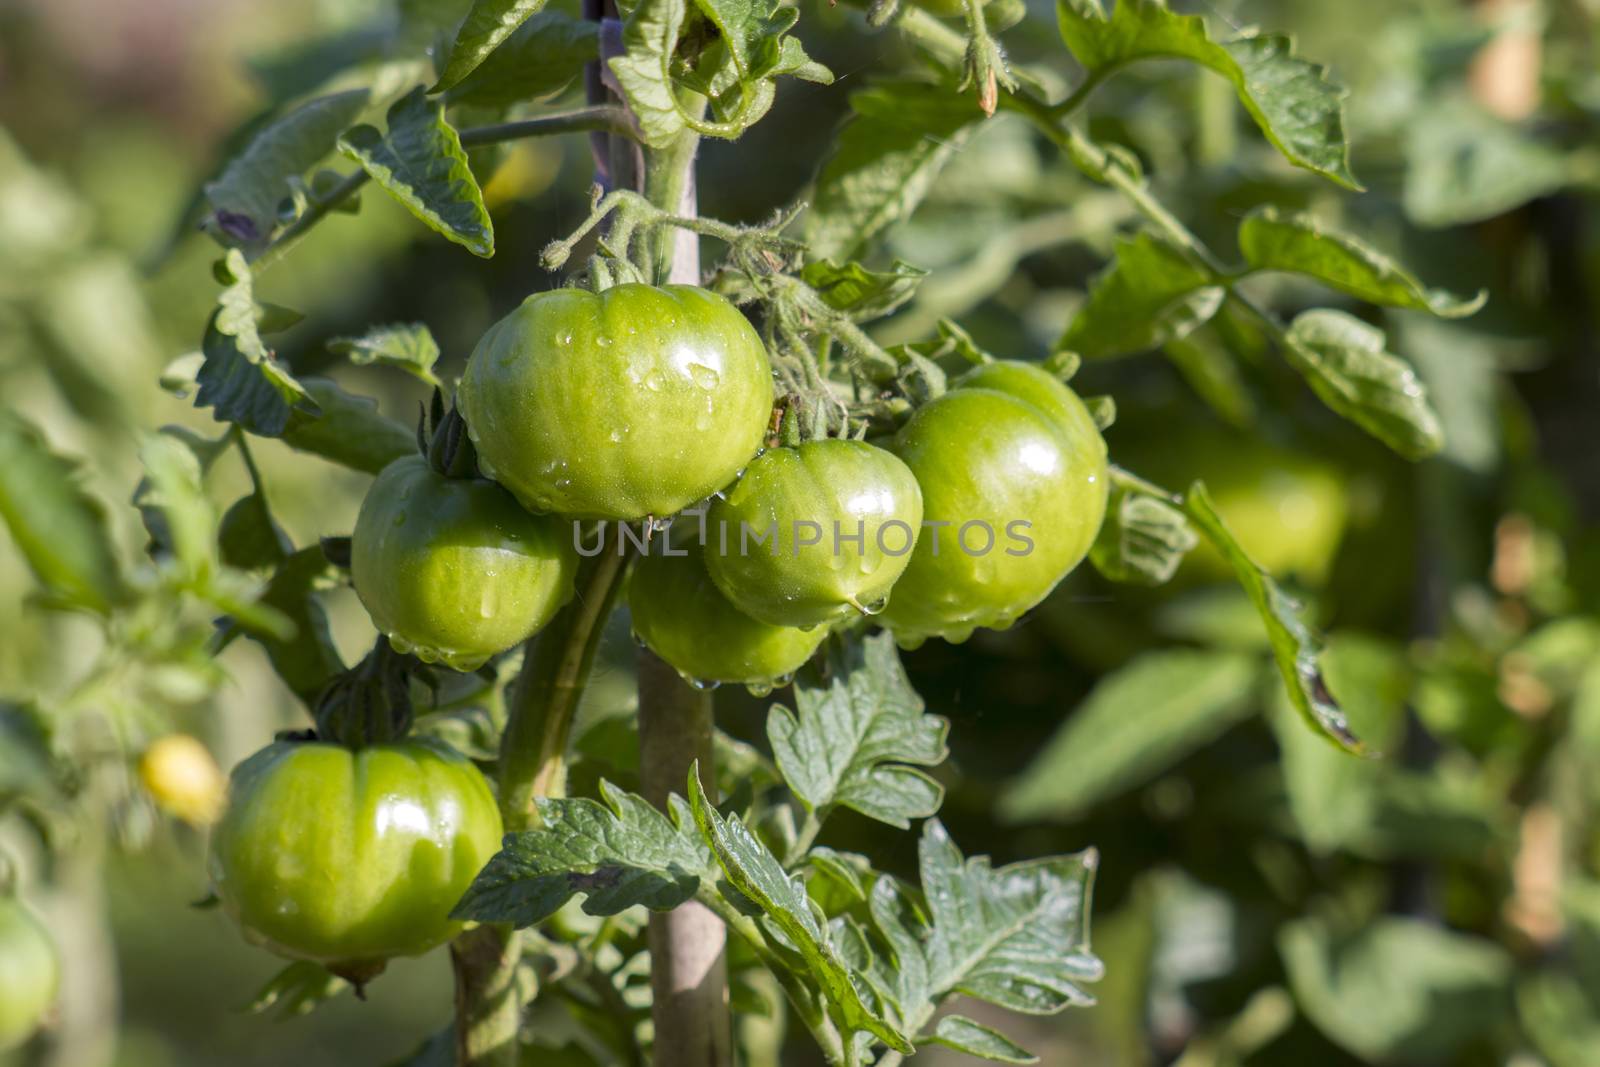 Green Tomatoes in a garden by miradrozdowski